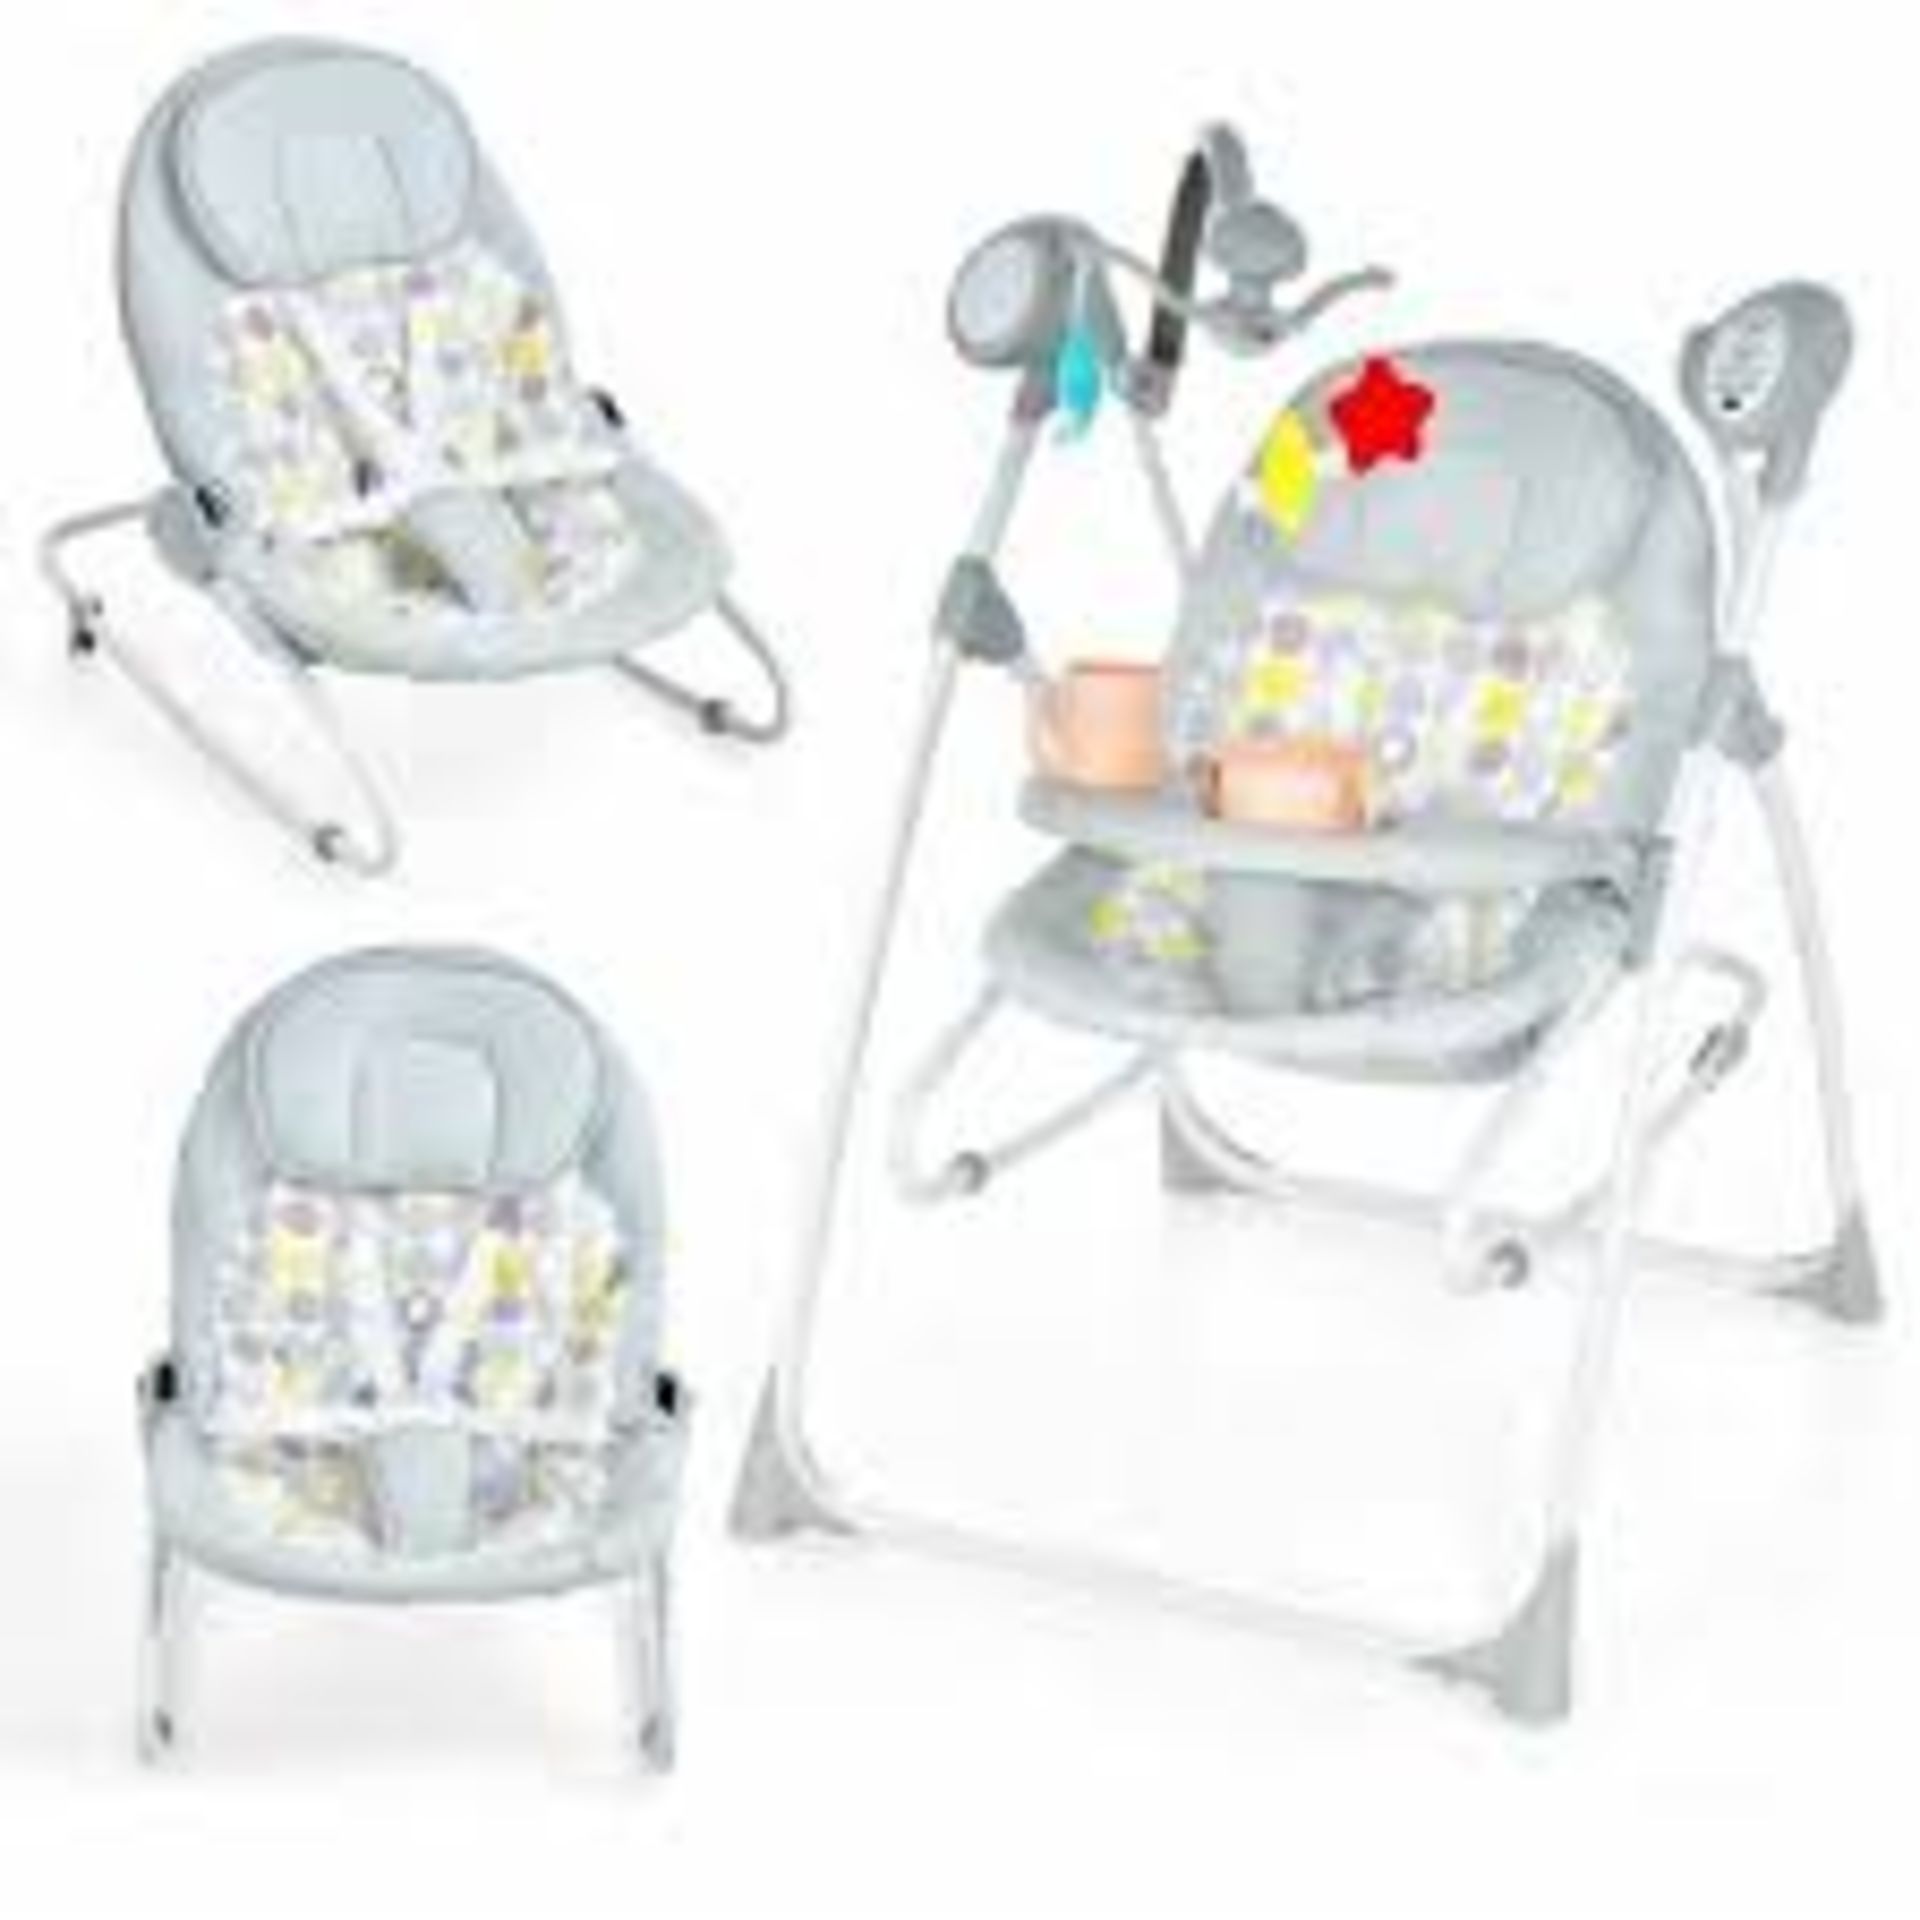 2-In-1 Baby Rocking Swing Infant Electric Rocker . - R14.15. Our 2-in-1 baby swing is a perfect